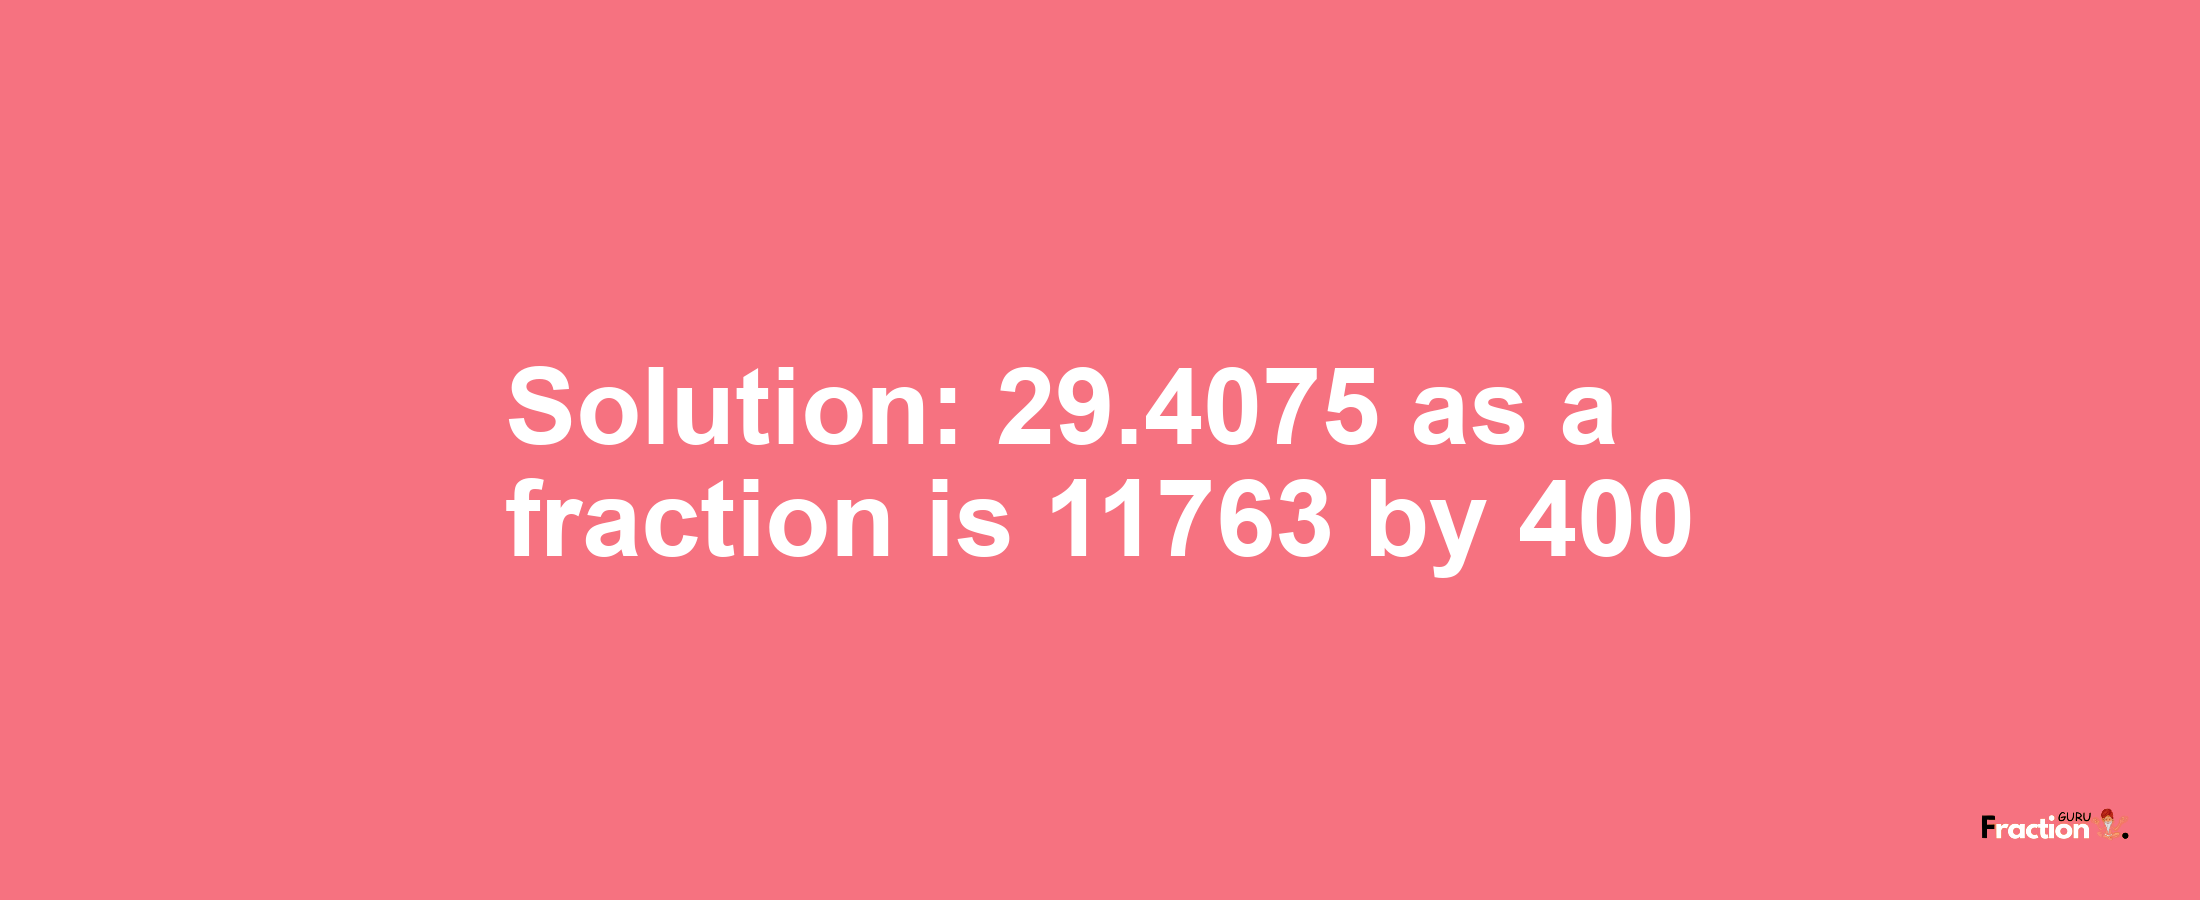 Solution:29.4075 as a fraction is 11763/400